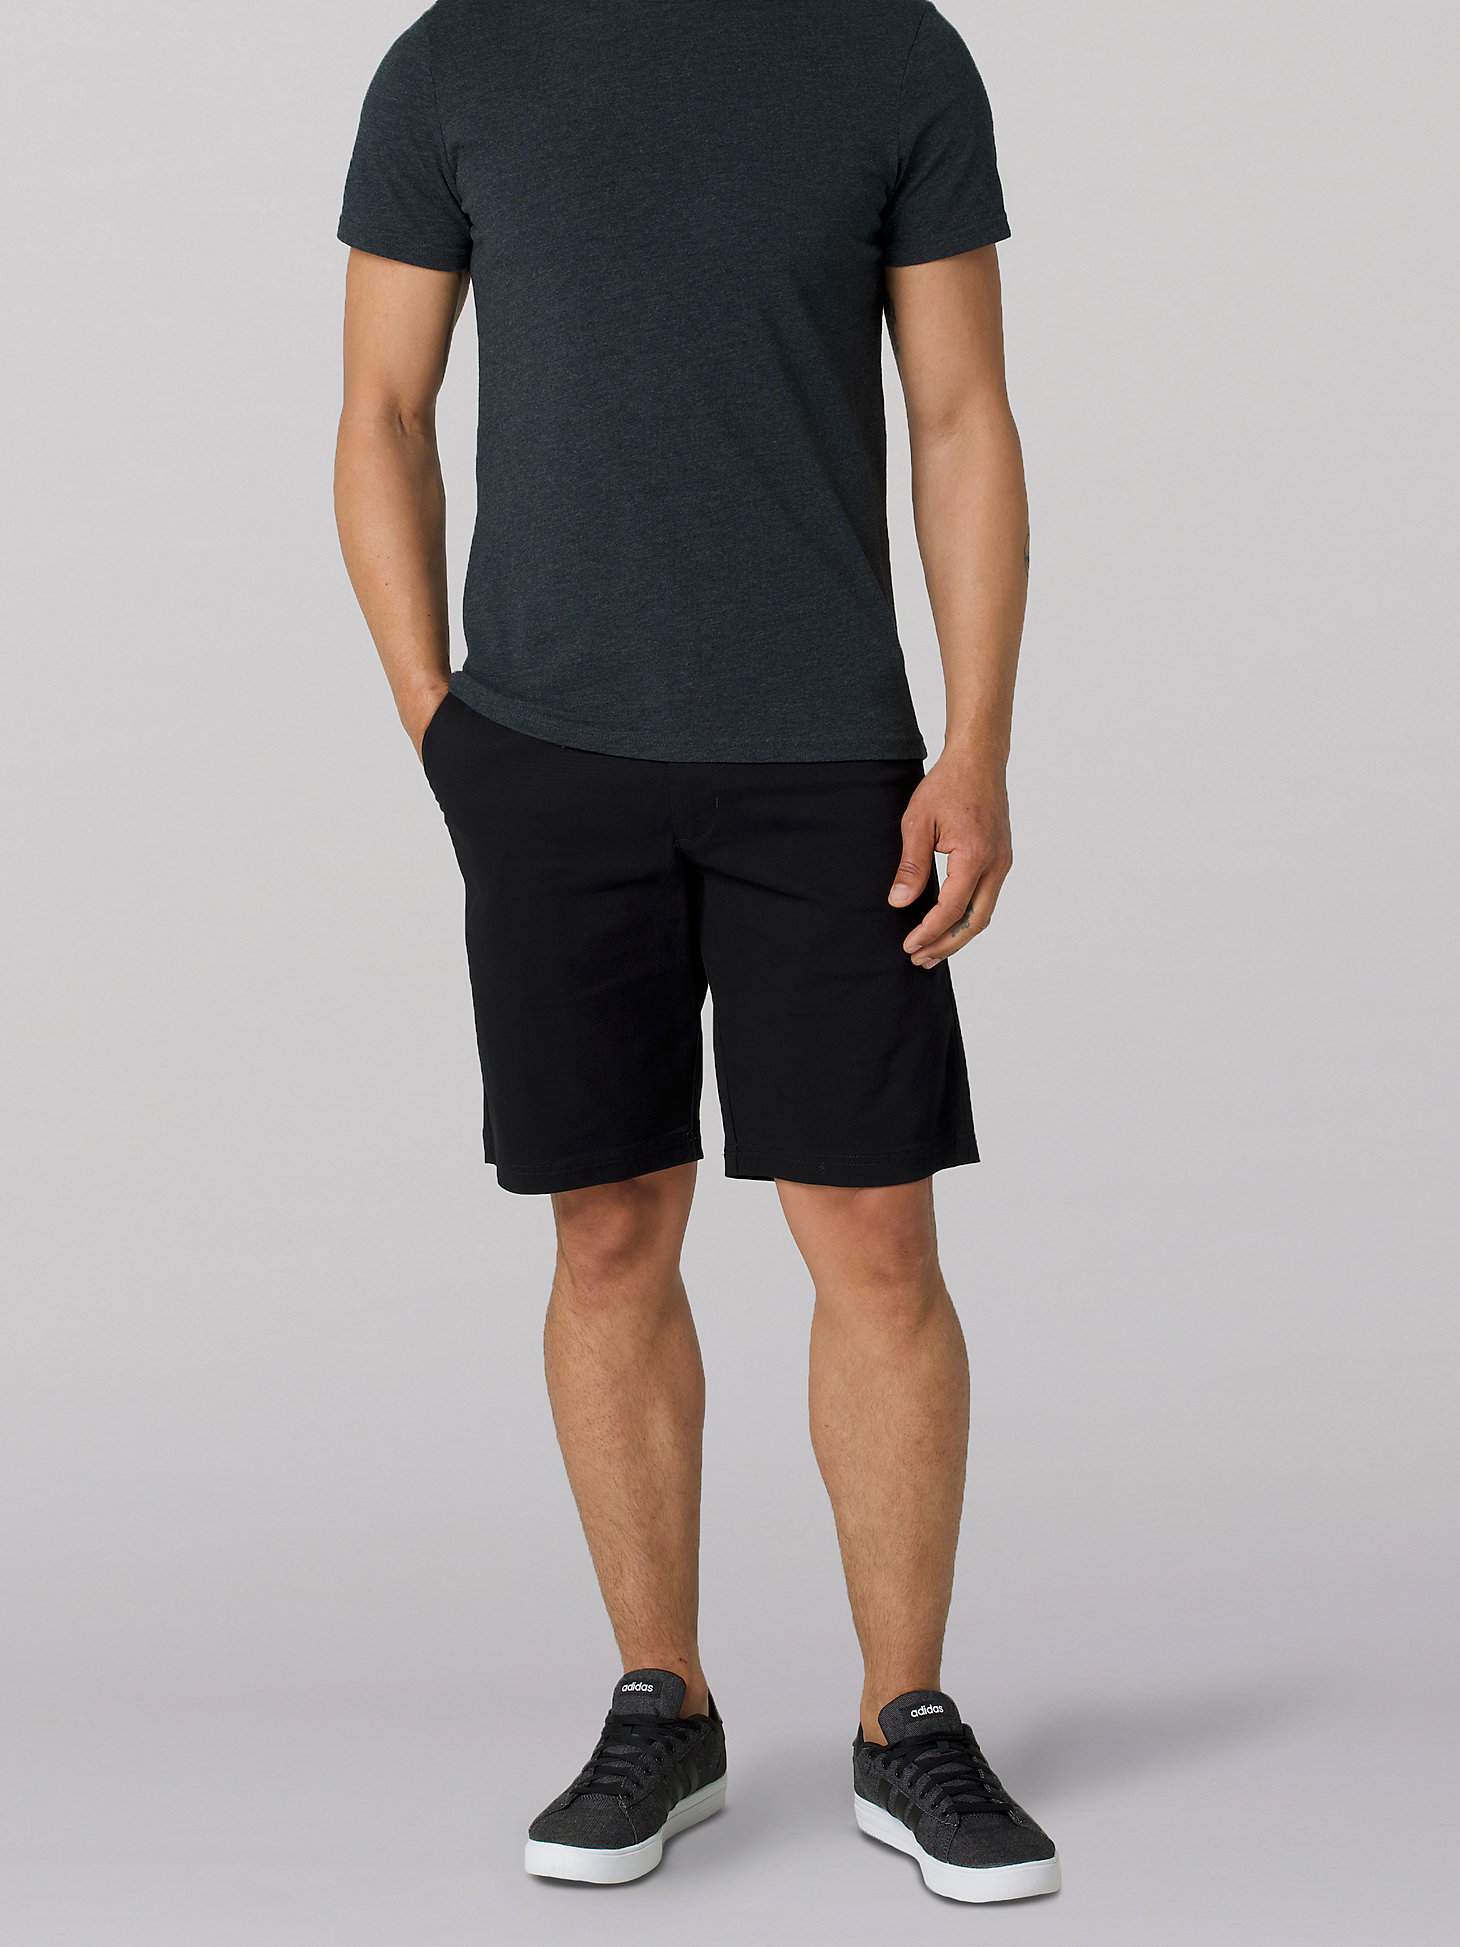 Men's Extreme Comfort Flat Front Short in Union All Black main view